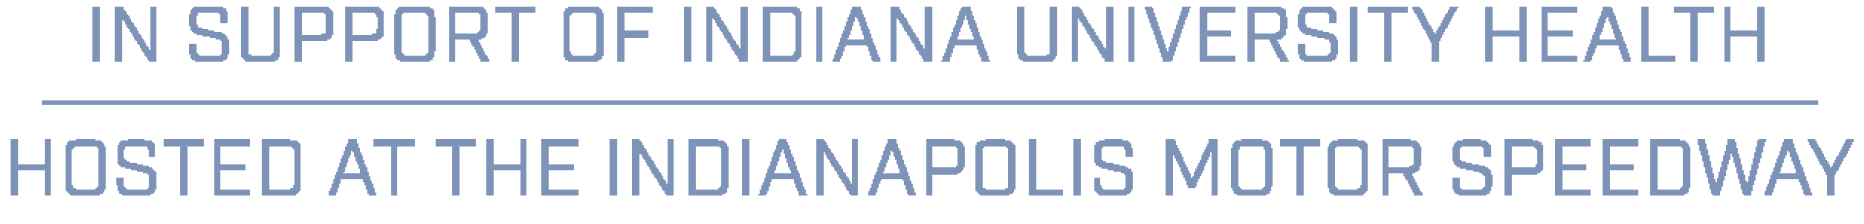 In support of Indiana University Health hosted at the Indianapolis Motor Speedway